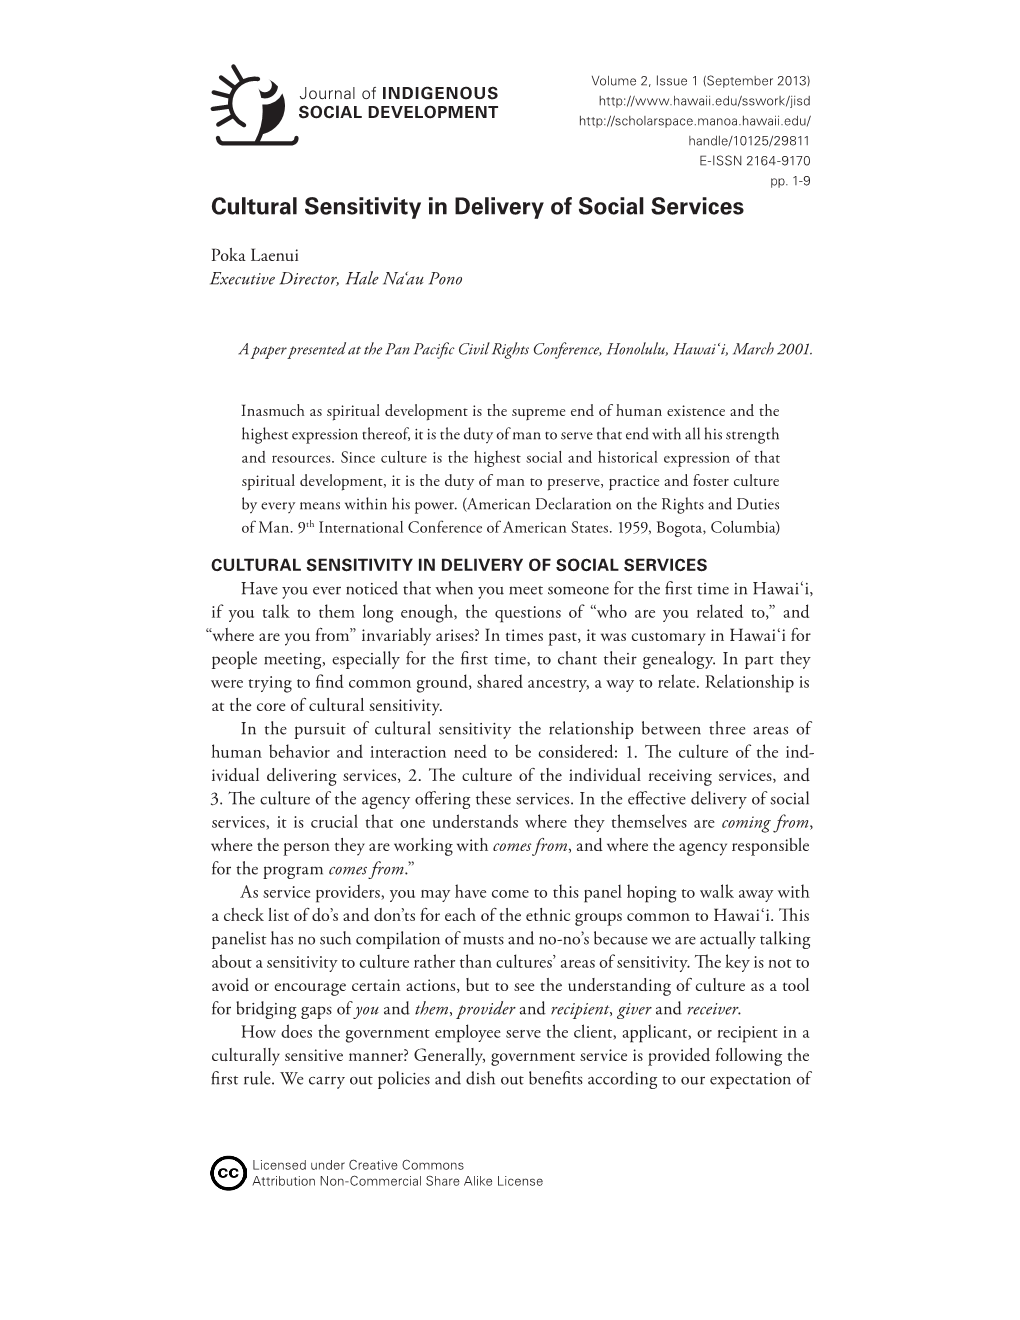 Cultural Sensitivity in Delivery of Social Services